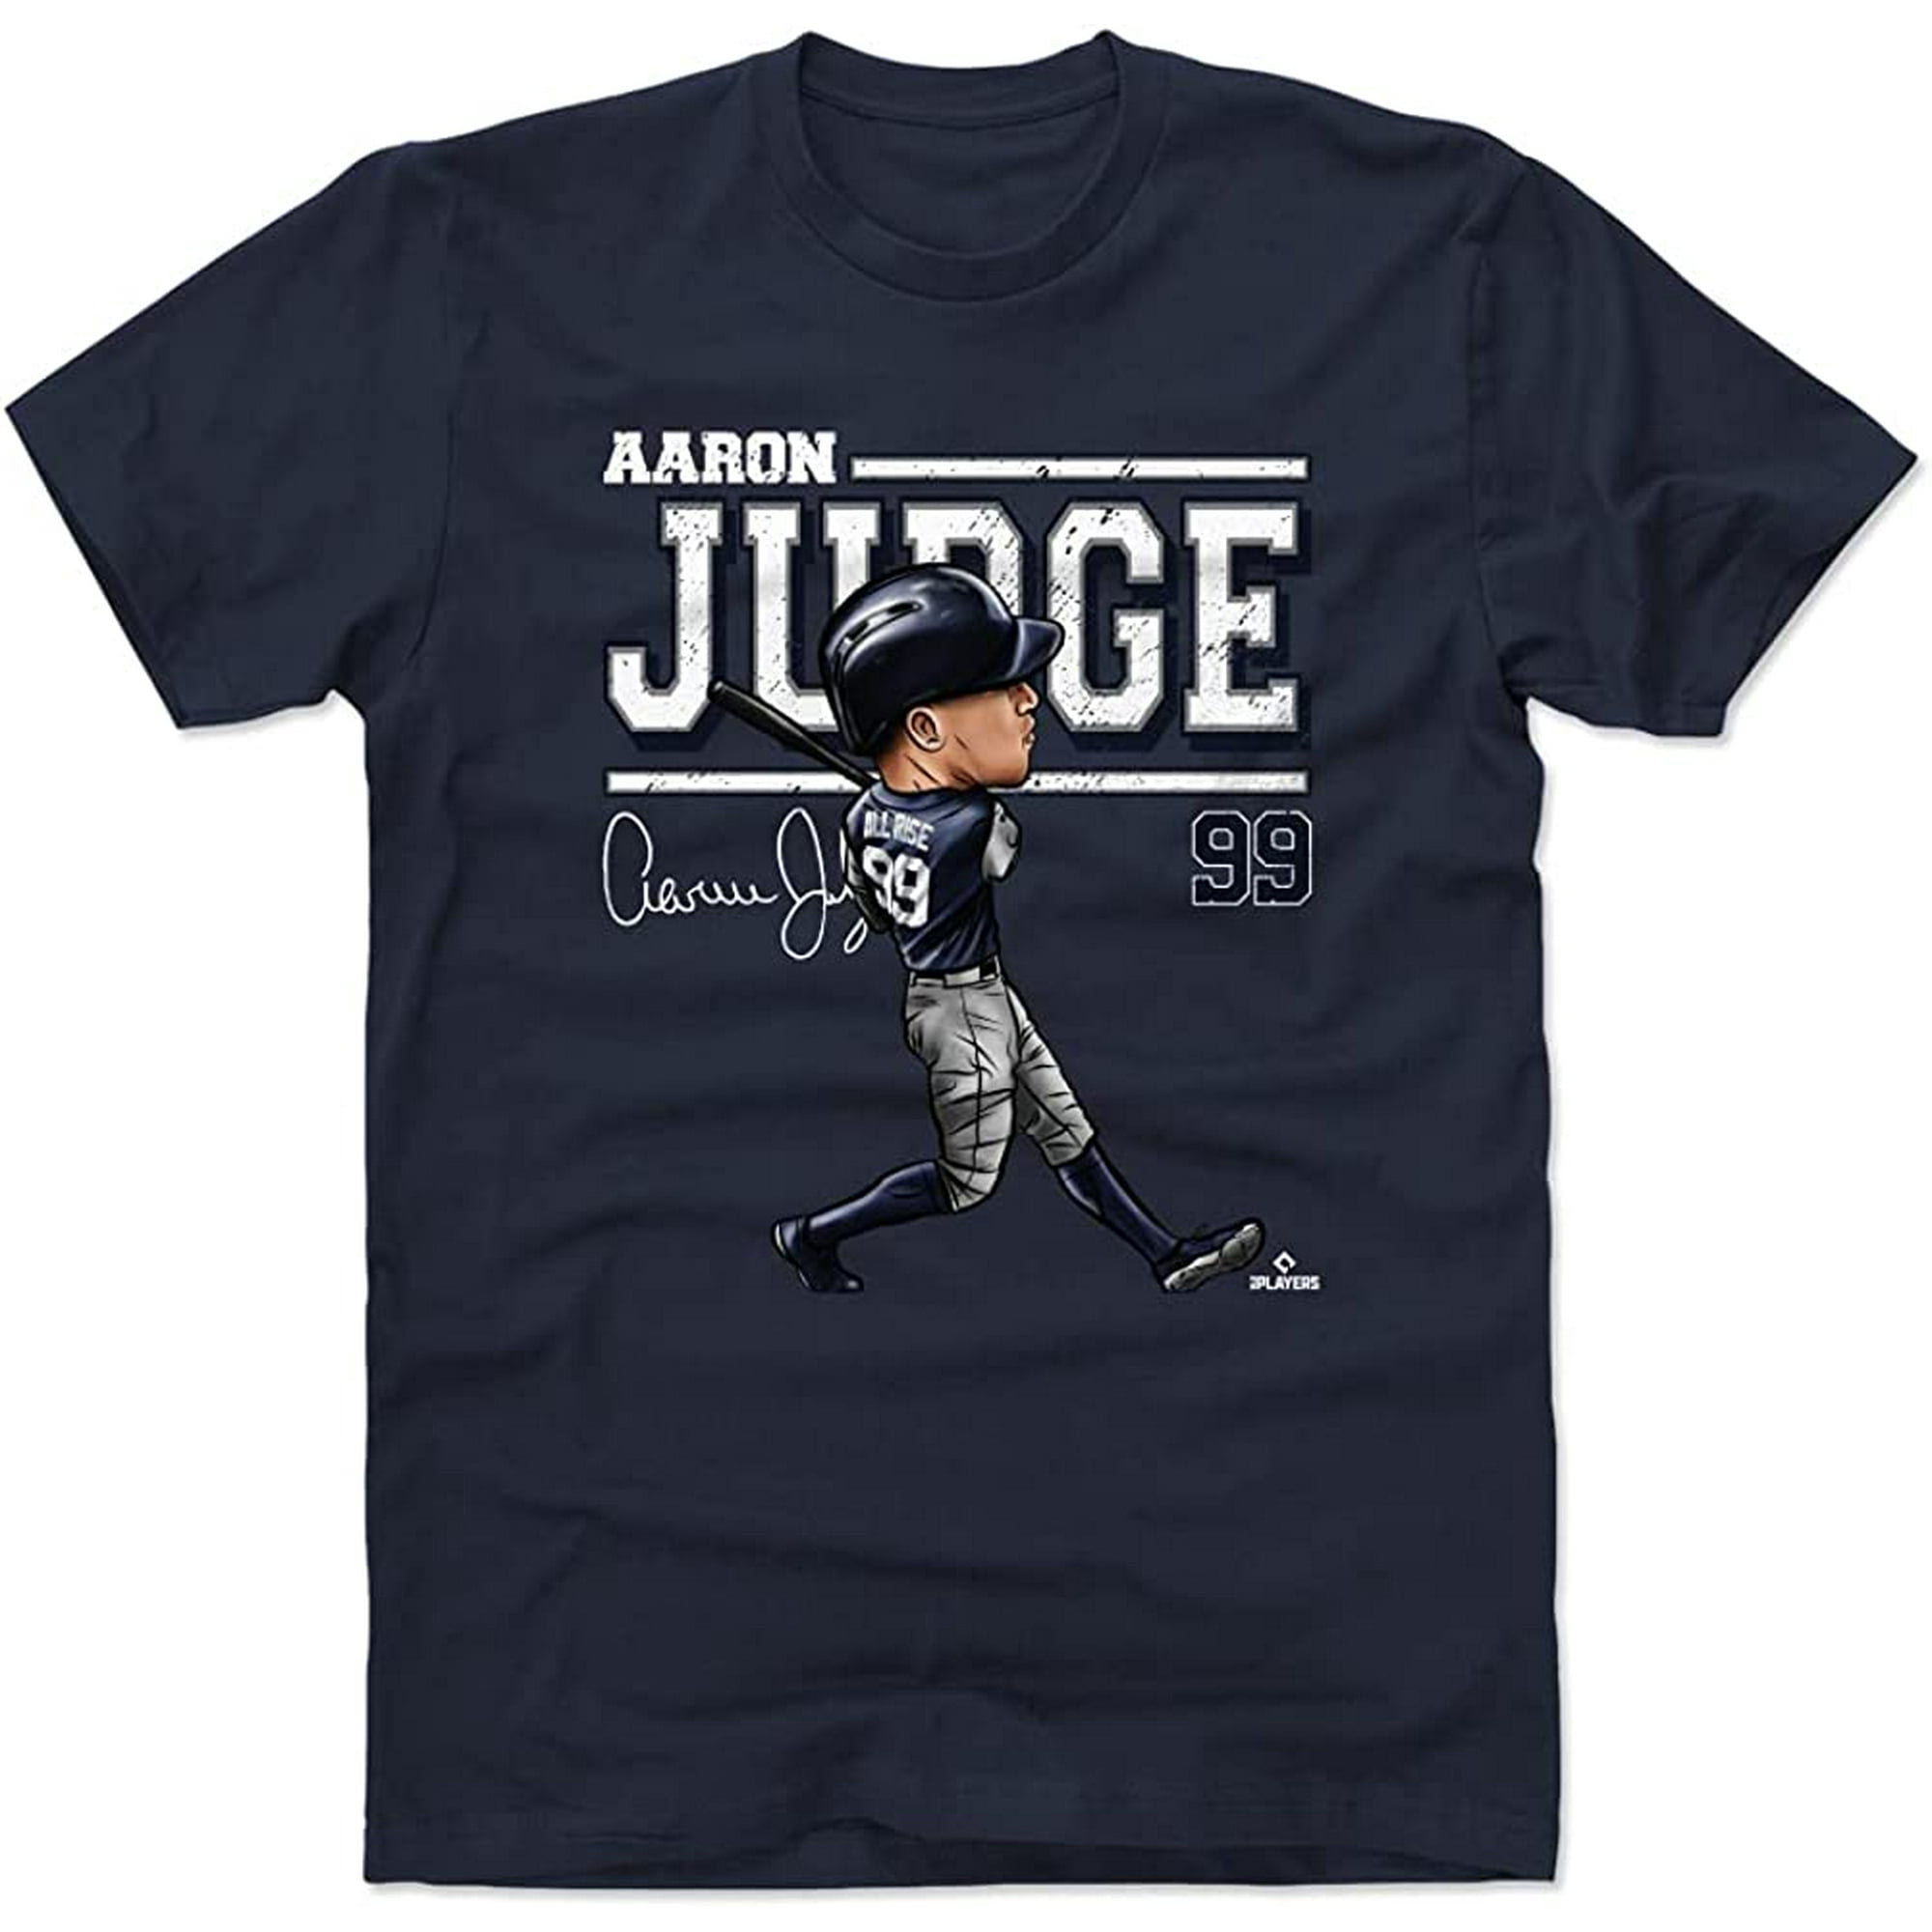 All Rise Aaron Judge T-Shirt MBL Baseball in 2023